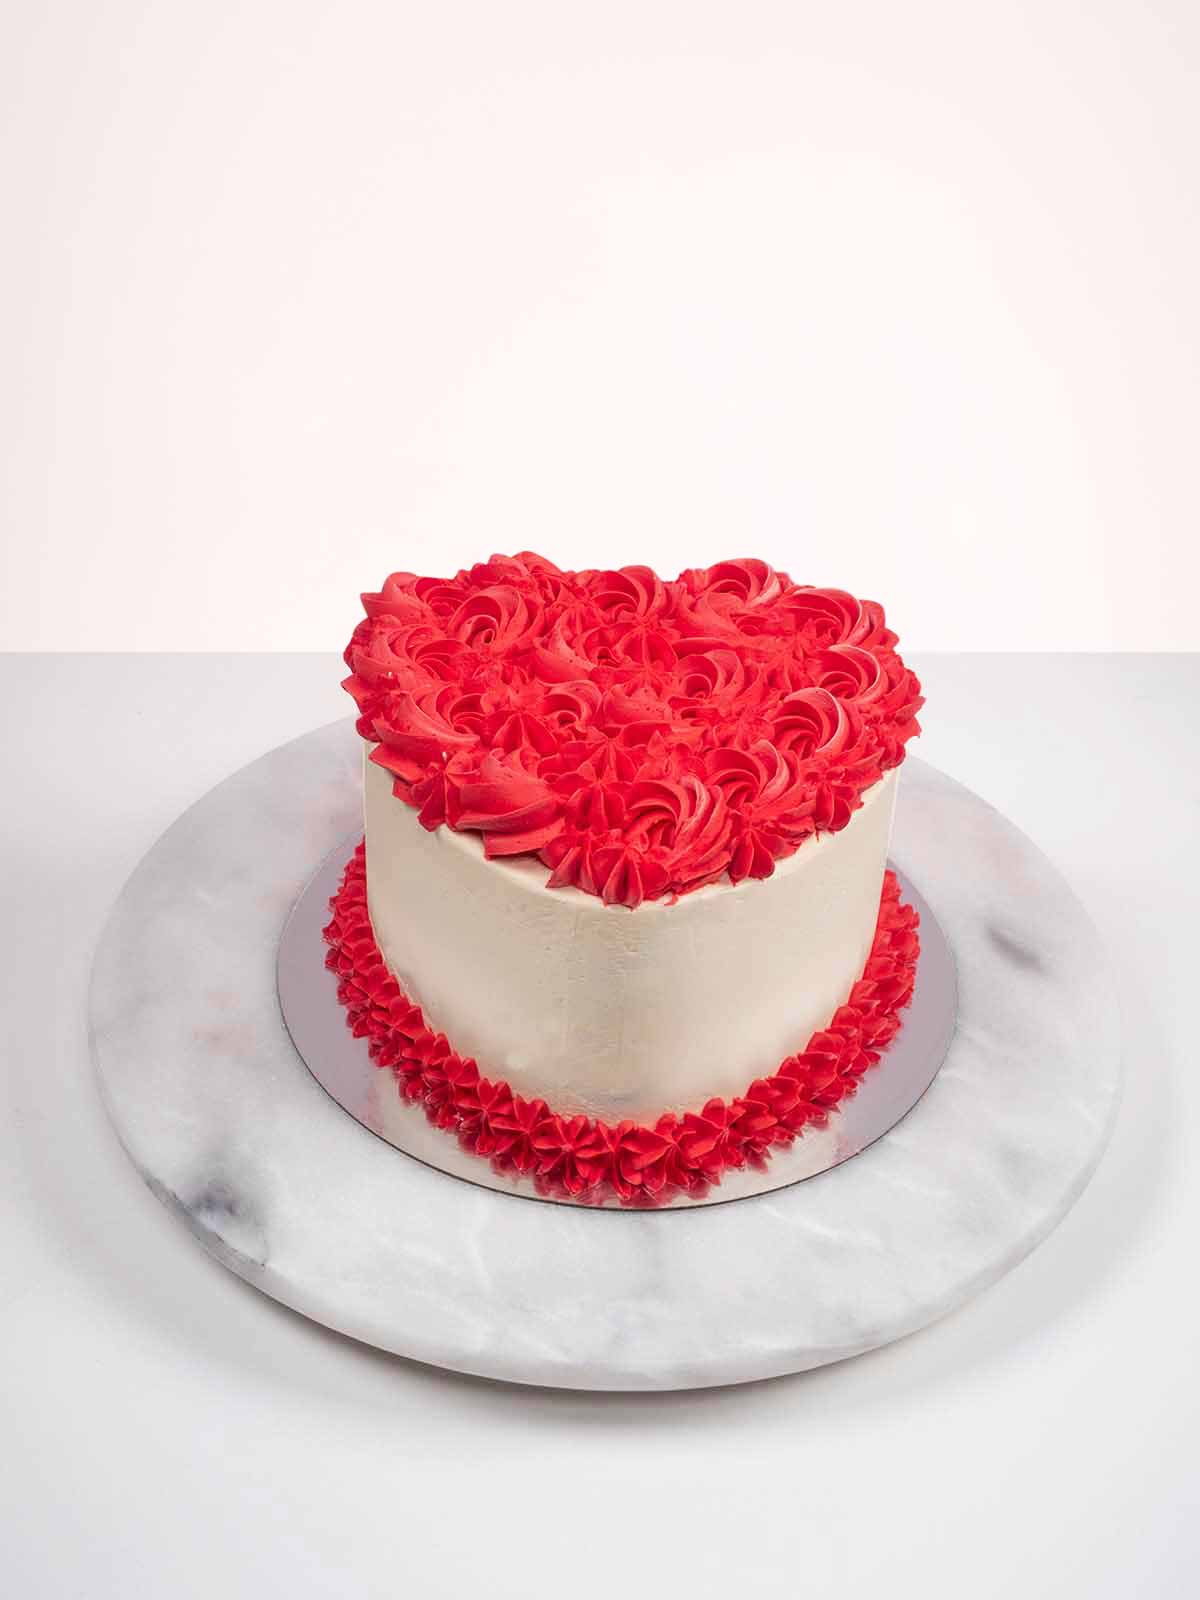 King's Half Kg Piping Jelly Cake Send For Your Girlfriend Birthday To Dhaka